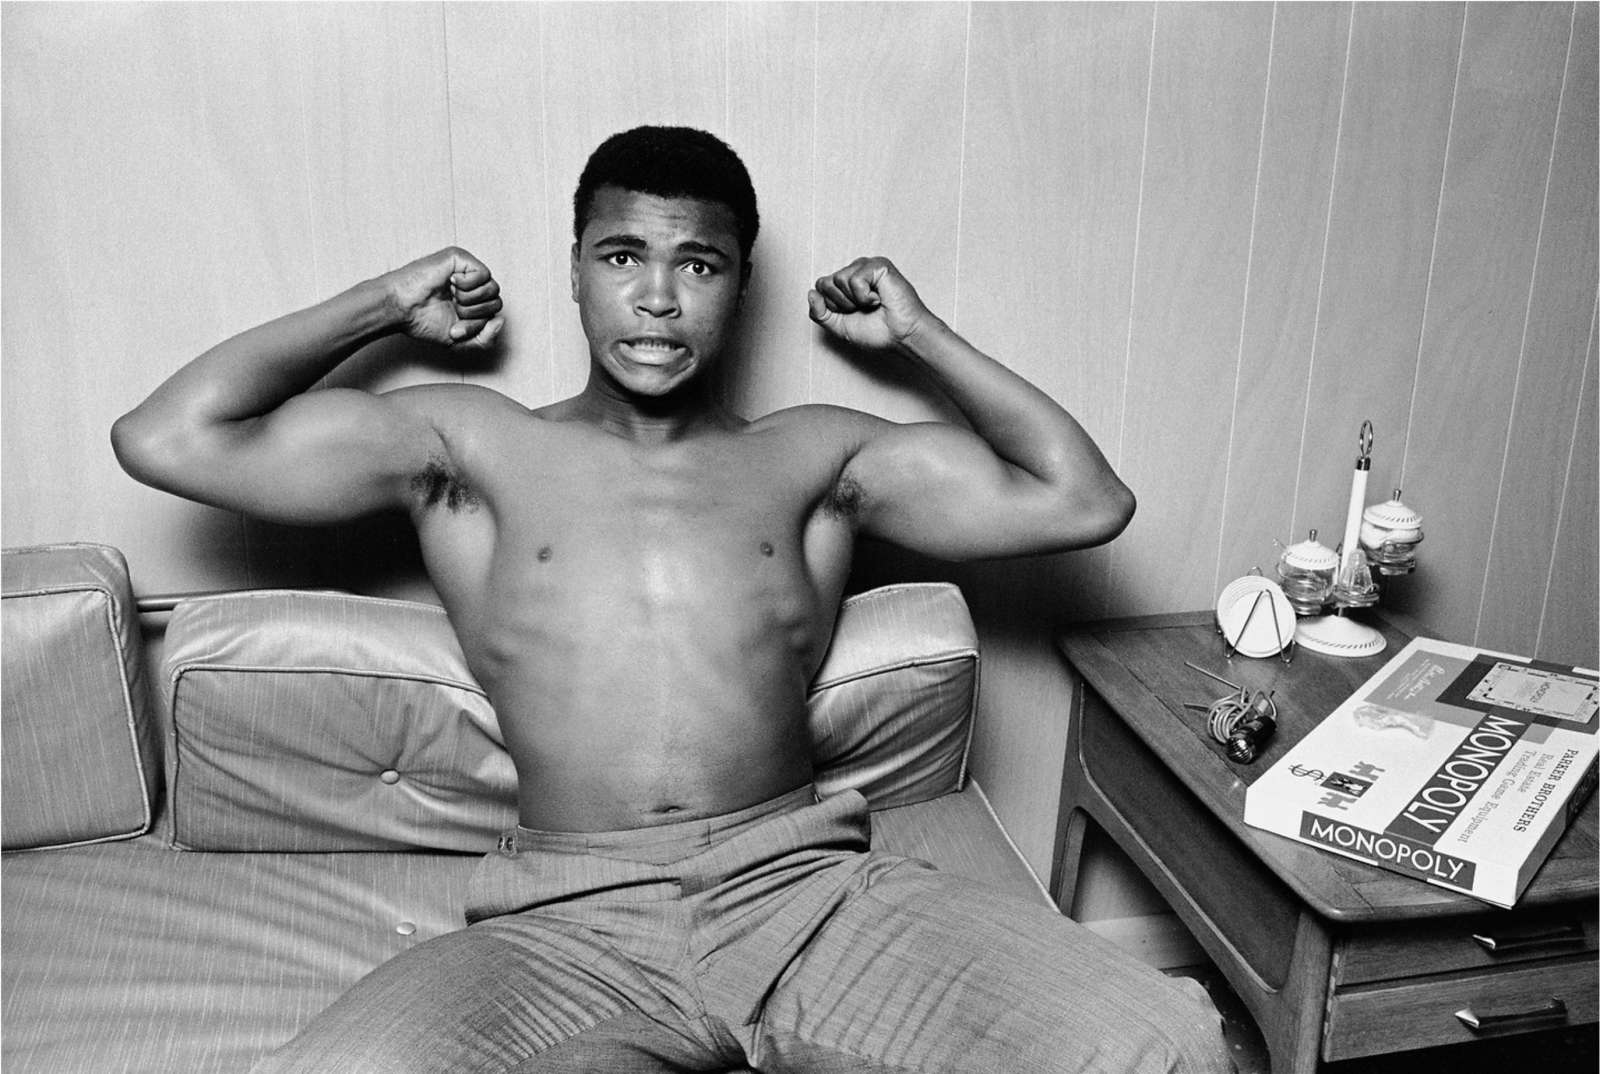 Superstars Andy Warhol and Muhammad Ali seen through a photographer’s lens 